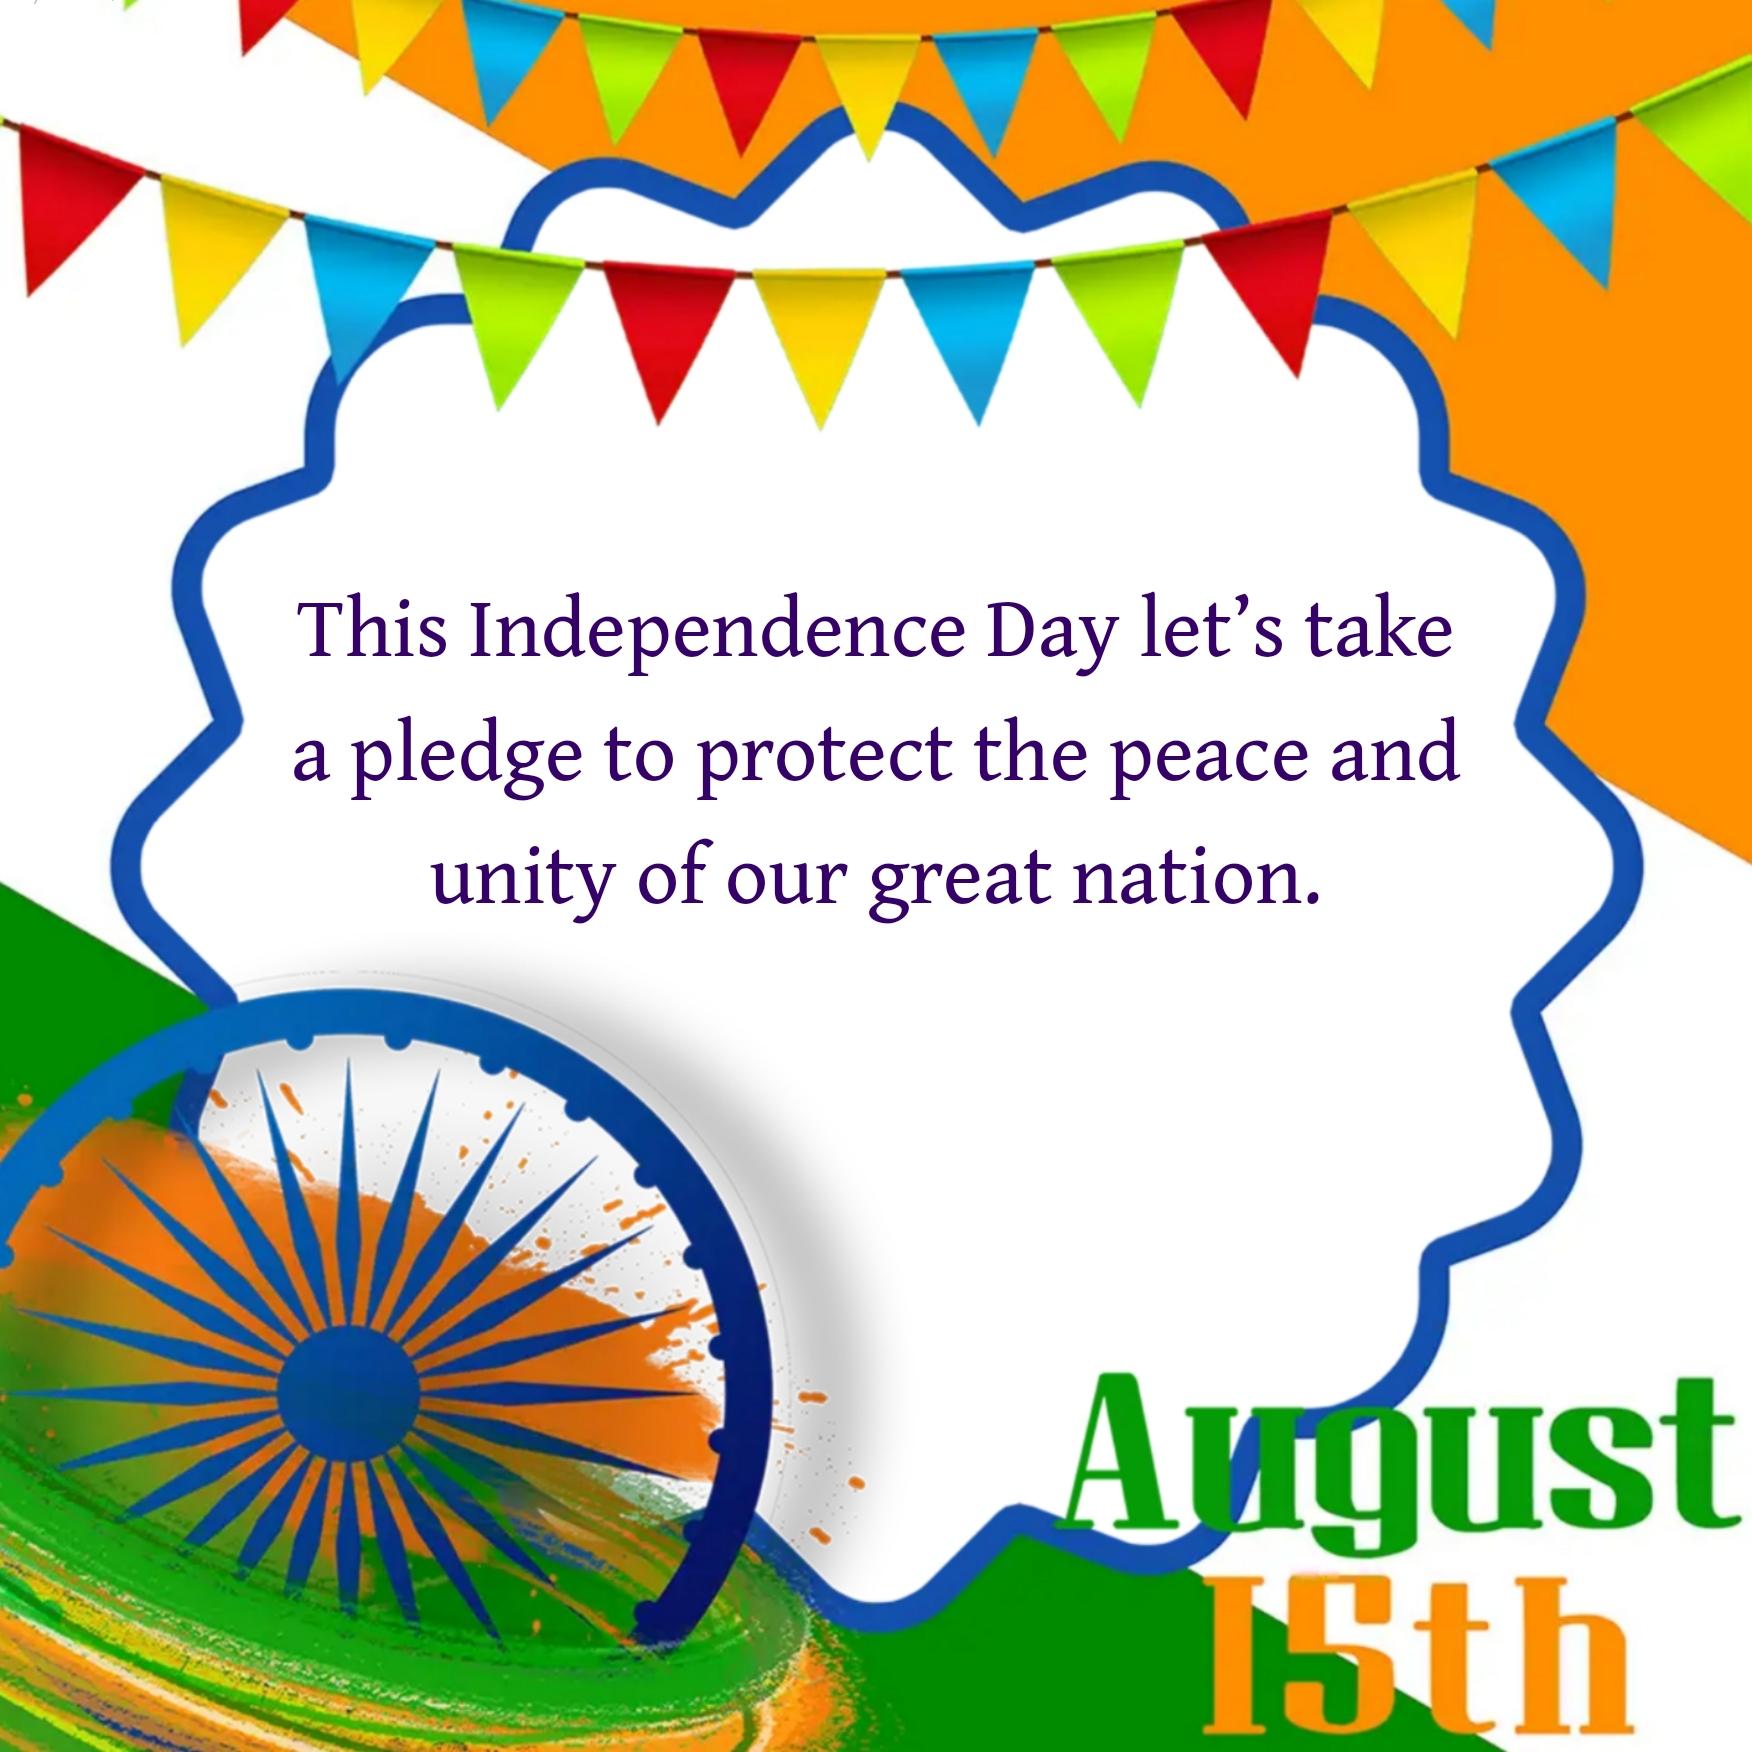 This Independence Day lets take a pledge to protect the peace